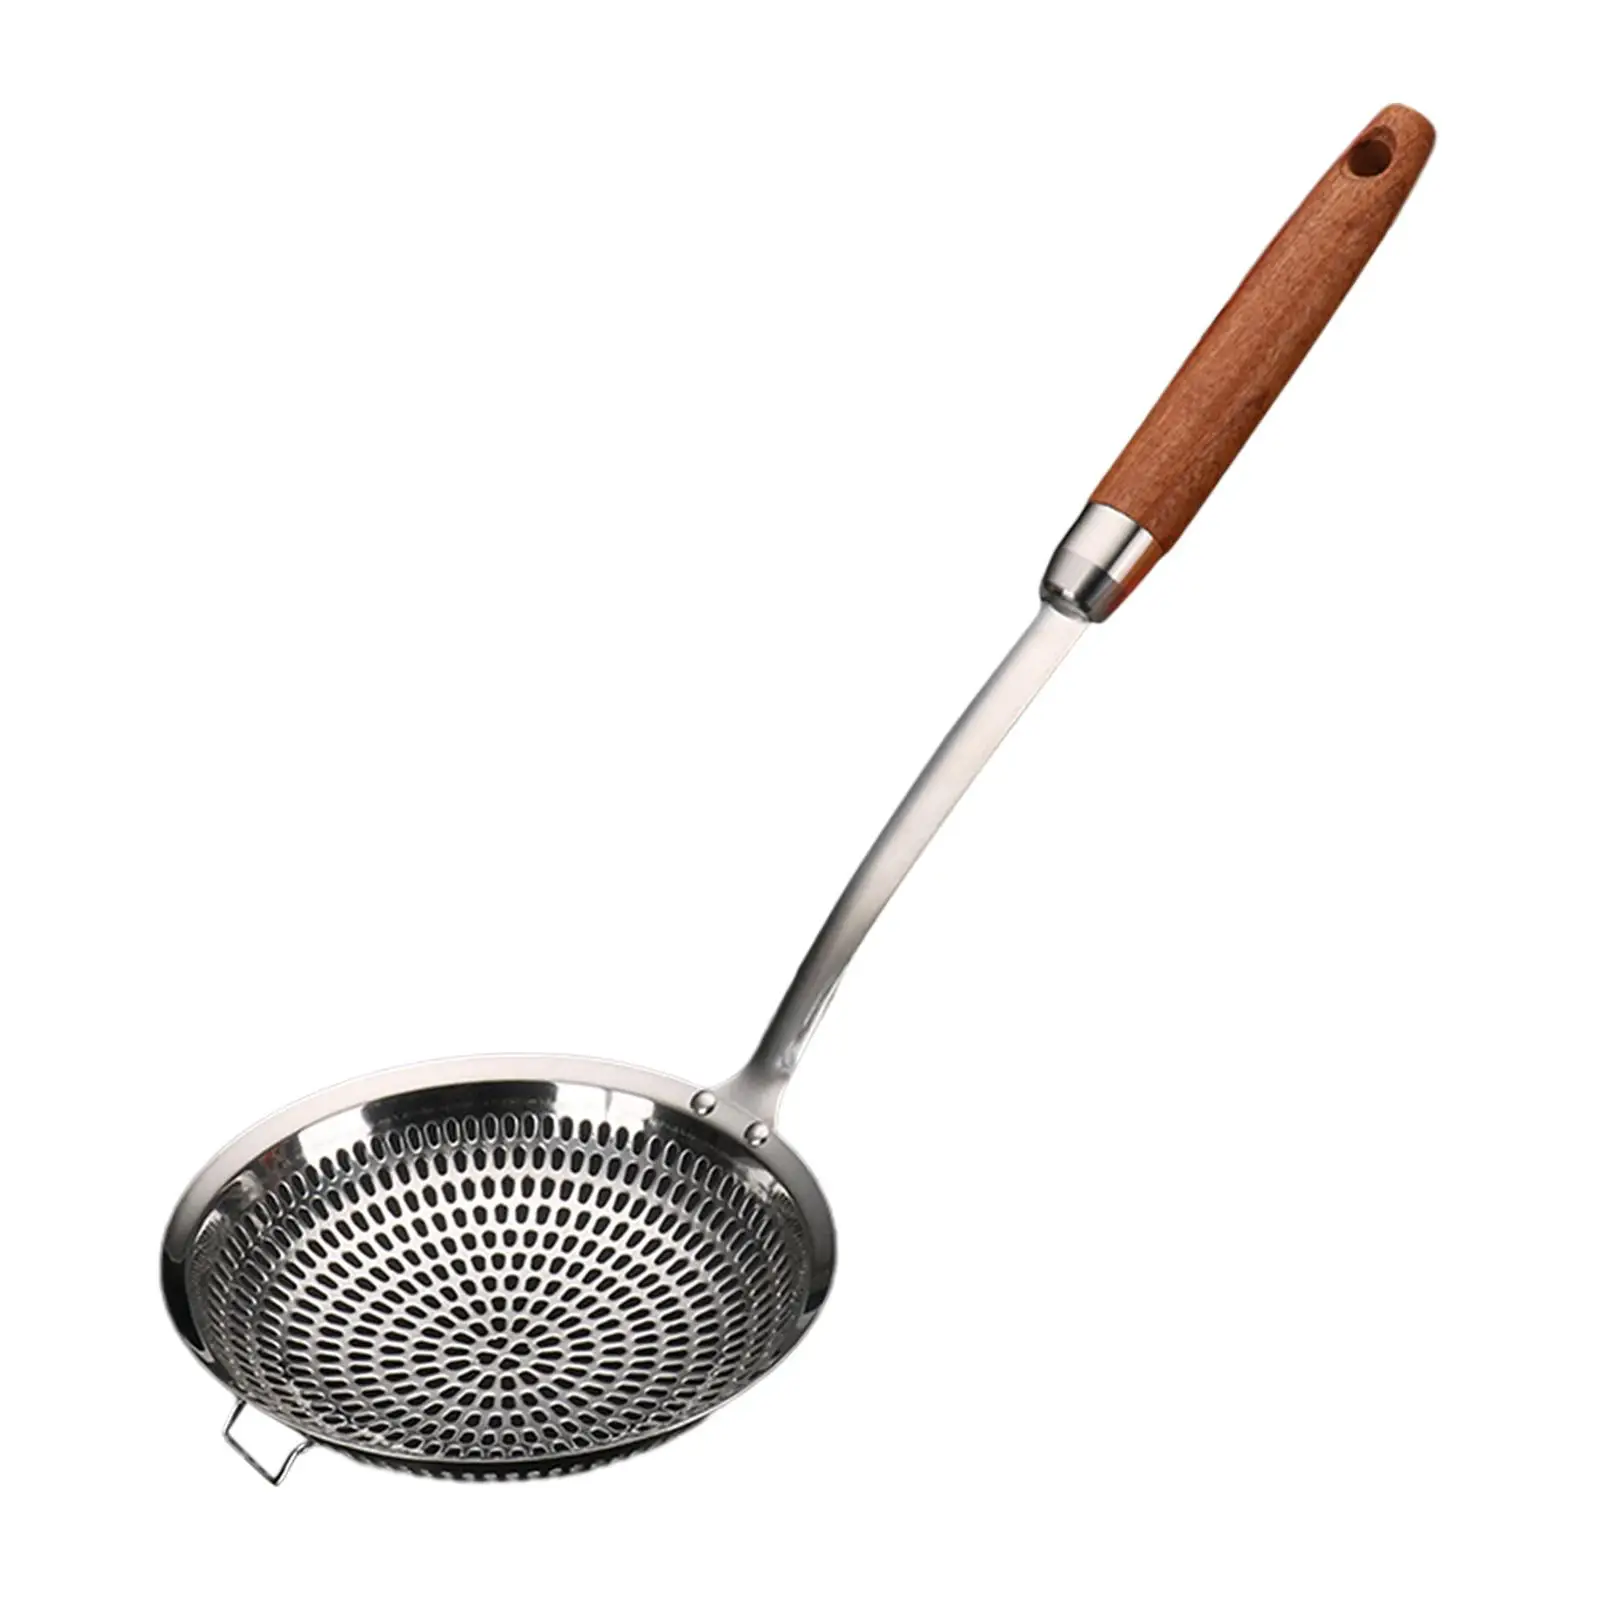 Skimmer Slotted Spoon Kitchen Utensil Kitchen Strainer Ladle Pasta Strainer Spoon for Noodles Pasta Cooking French Fries Frying